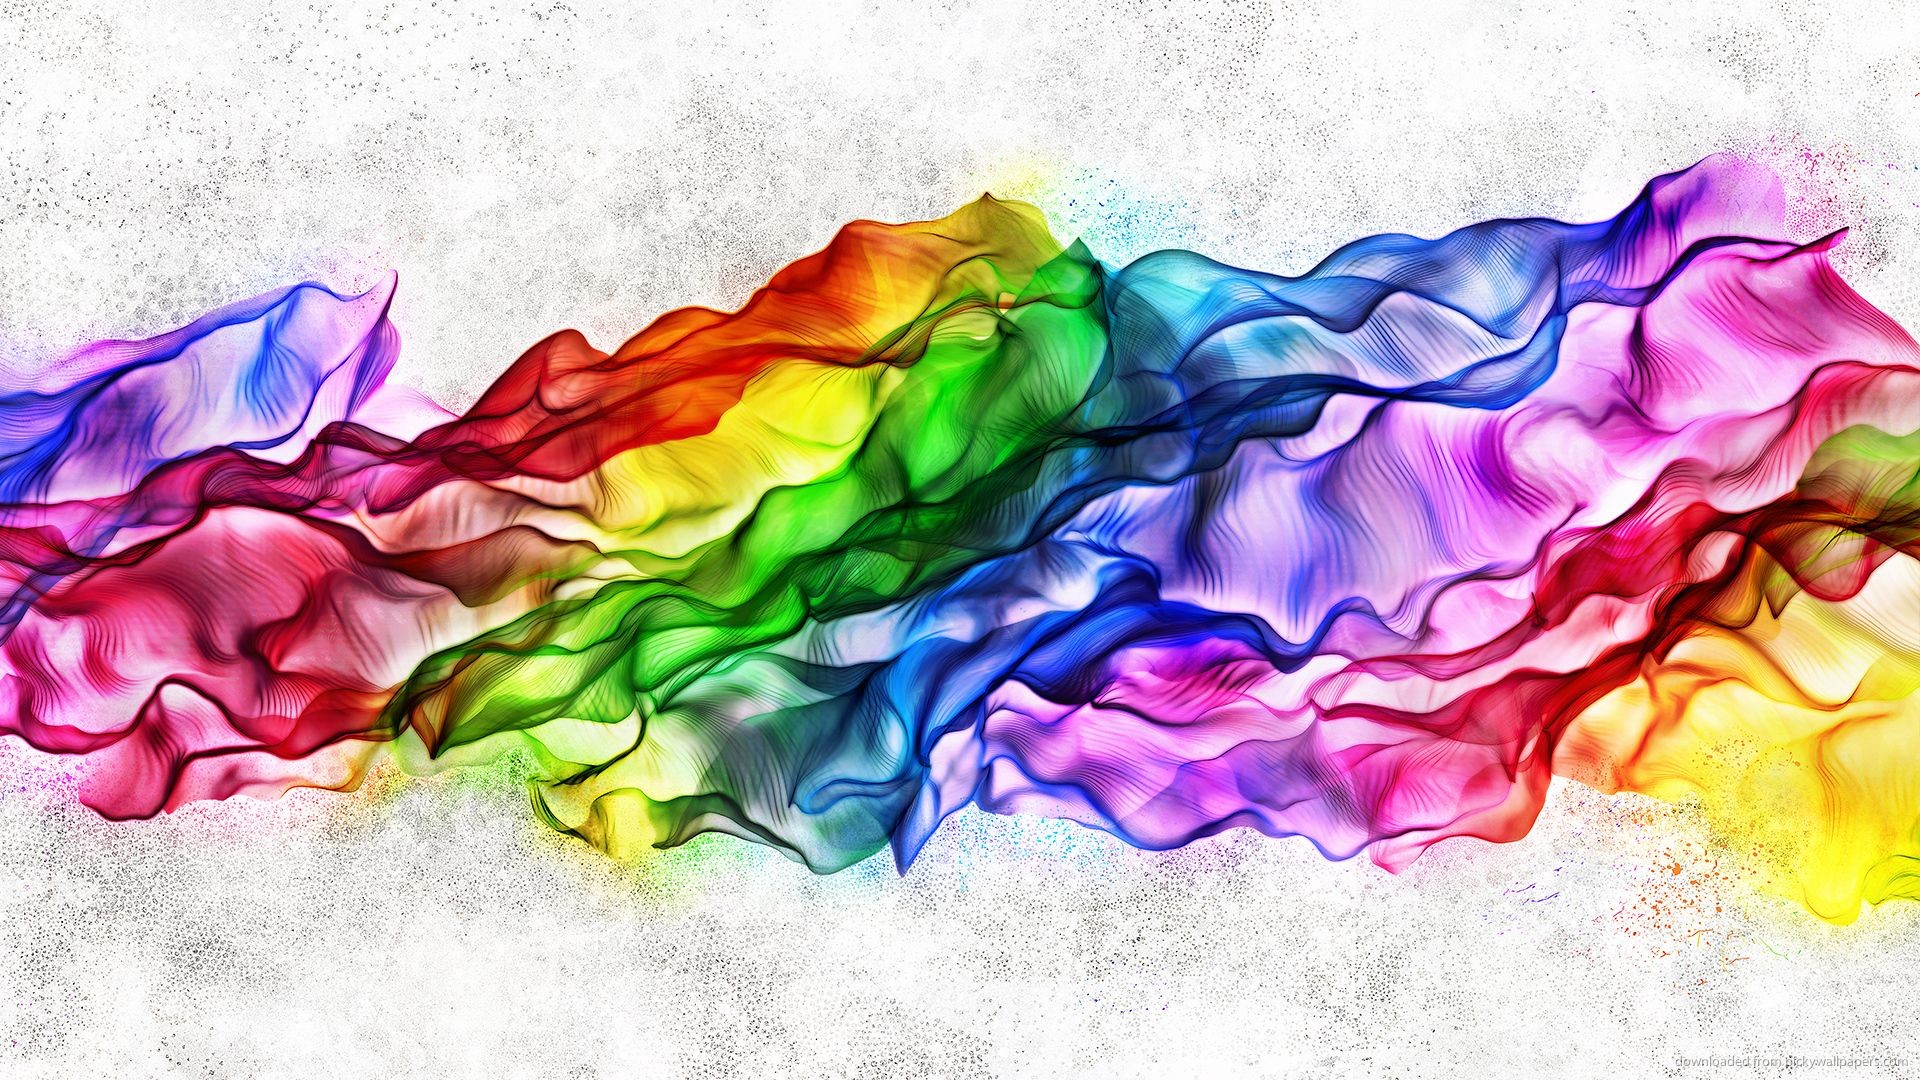 Wallpaper HD Rainbow With Resolution 1920X1080 pixel. You can make this wallpaper for your Desktop Computer Backgrounds, Mac Wallpapers, Android Lock screen or iPhone Screensavers